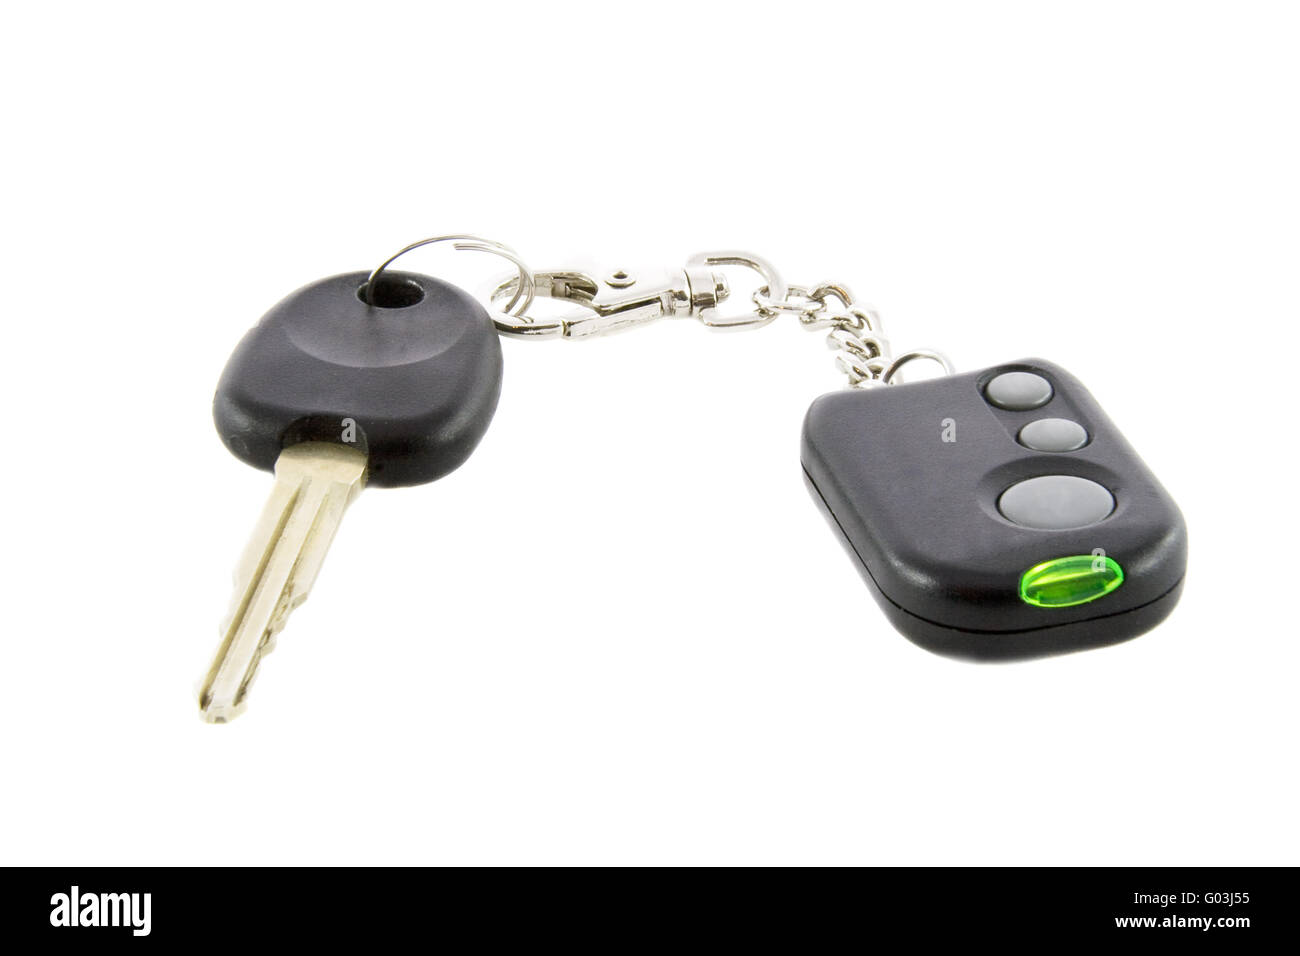 Car keys and remote control of car alarm system isolated over white background Stock Photo